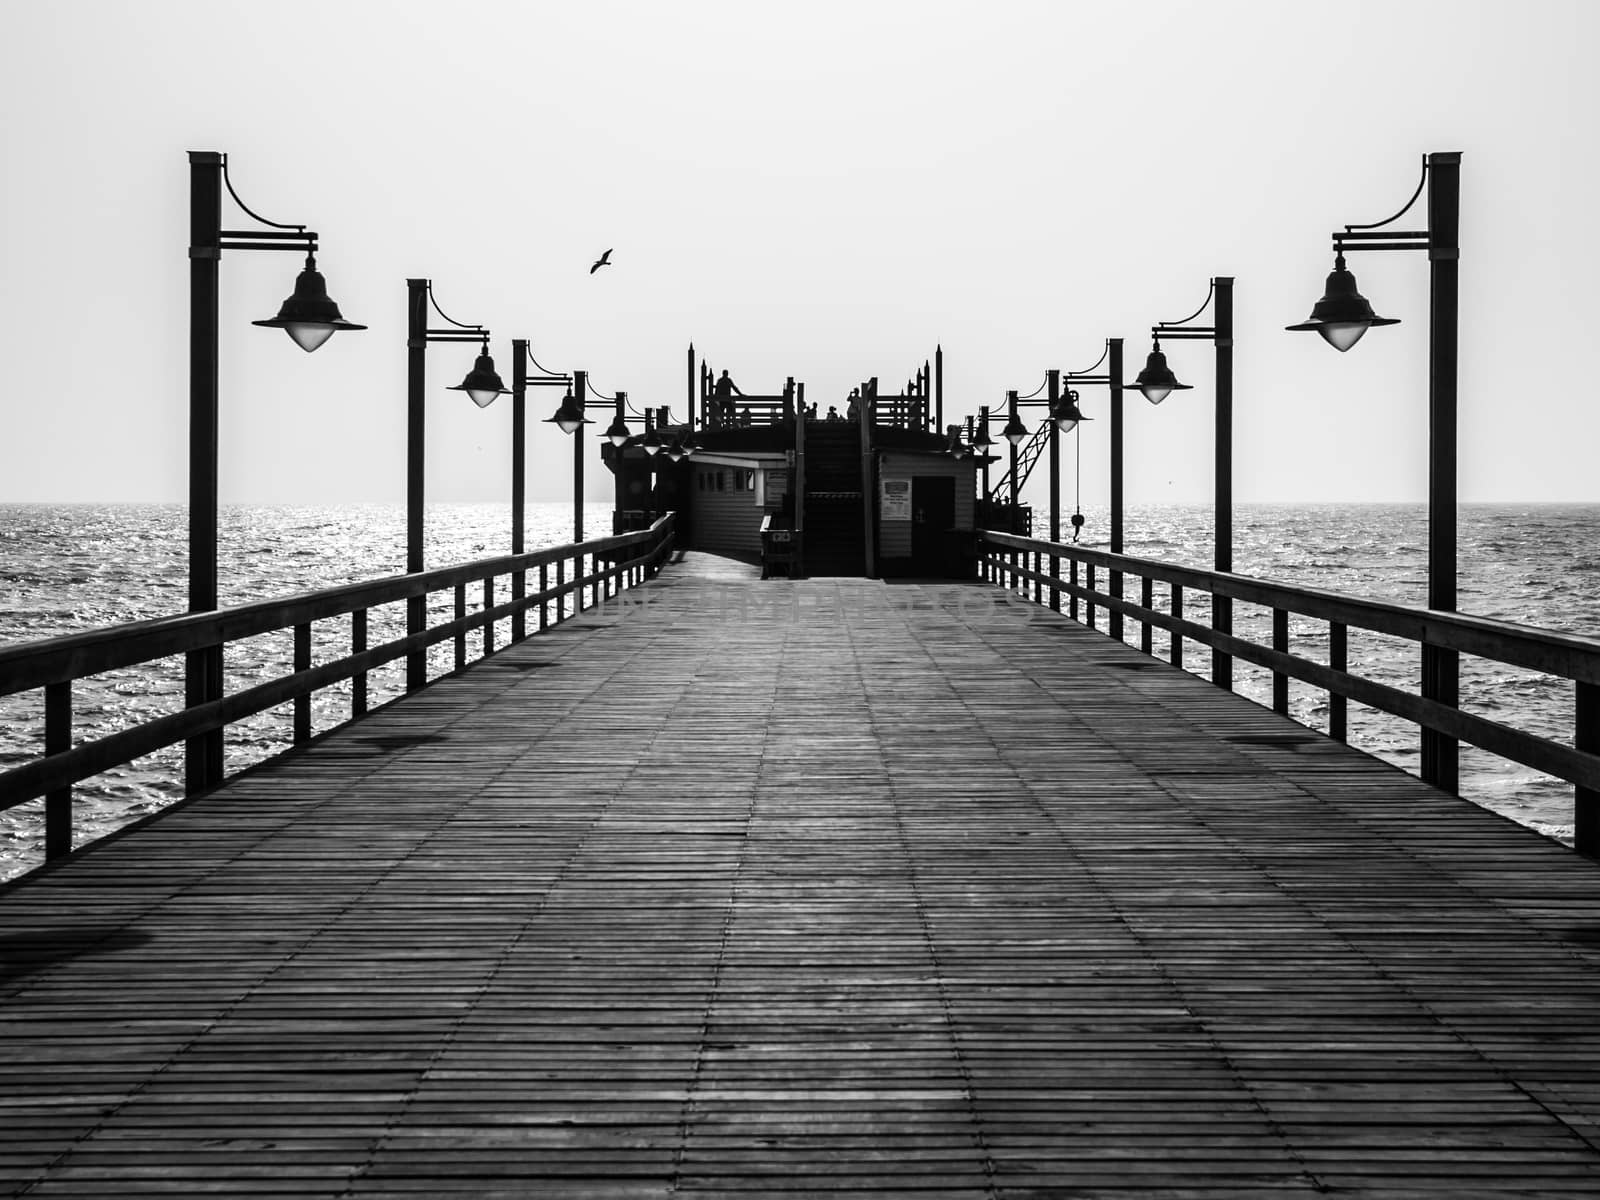 Pier with lamps in black and white by pyty